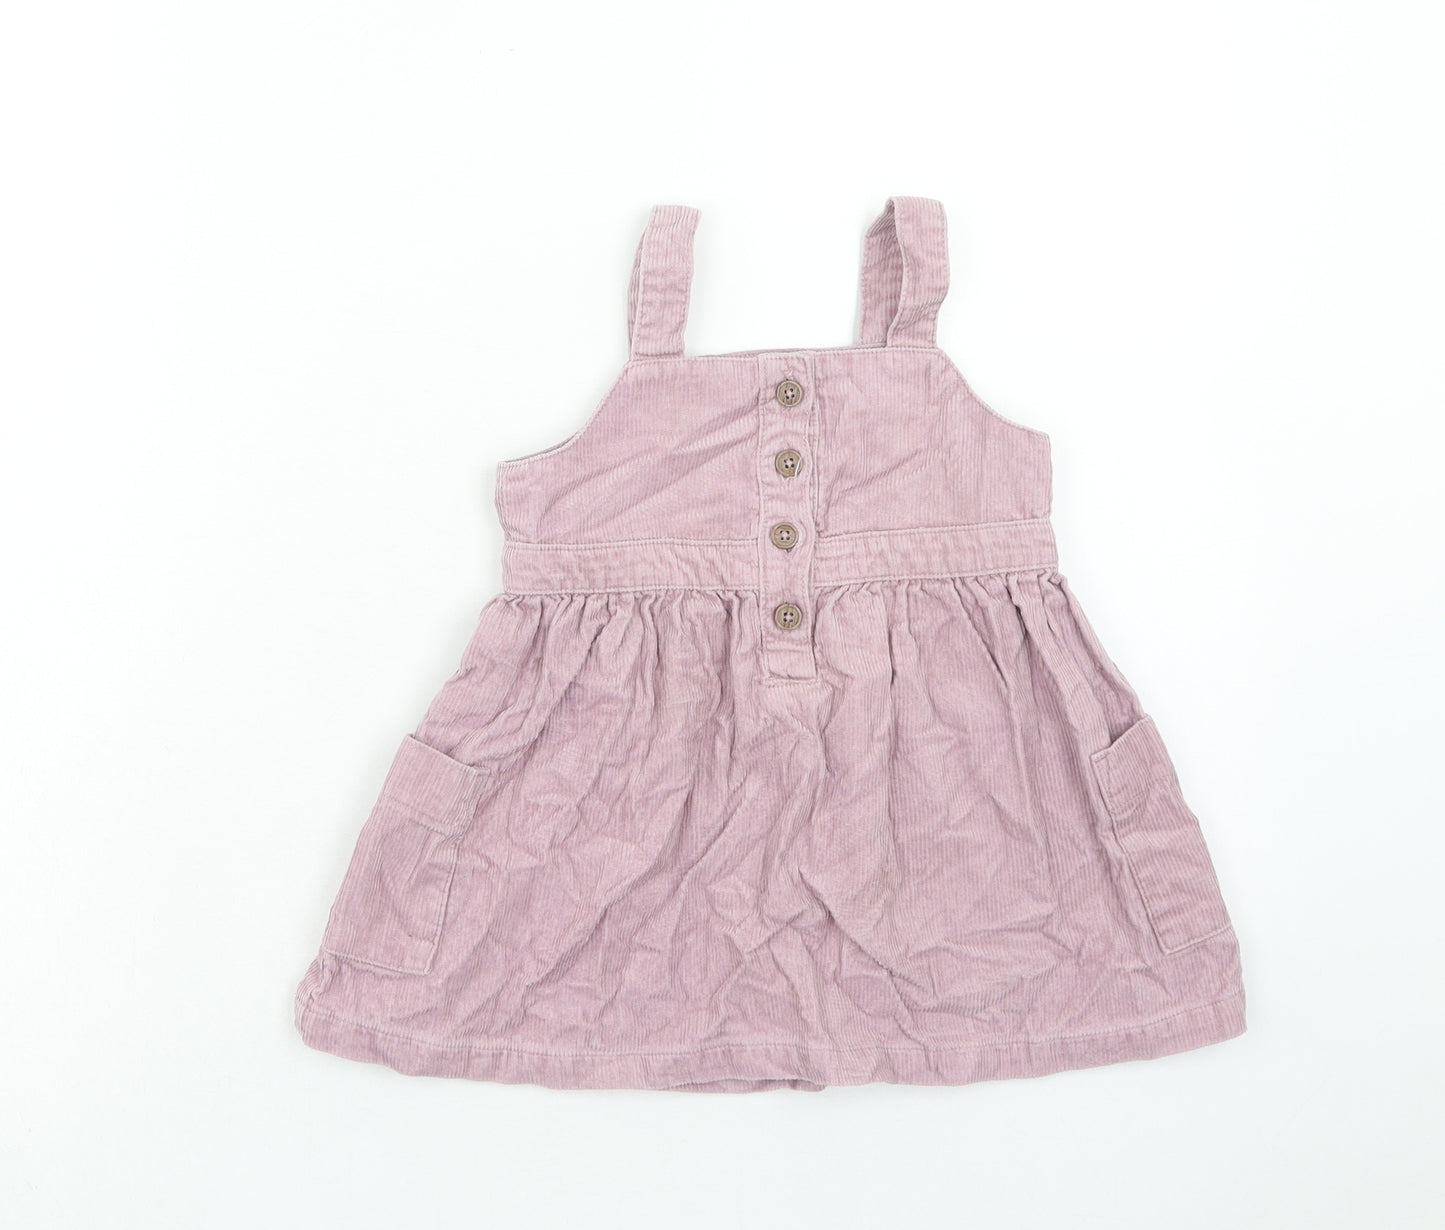 NEXT Girls Pink Cotton Pinafore/Dungaree Dress Size 2 Years Square Neck Button